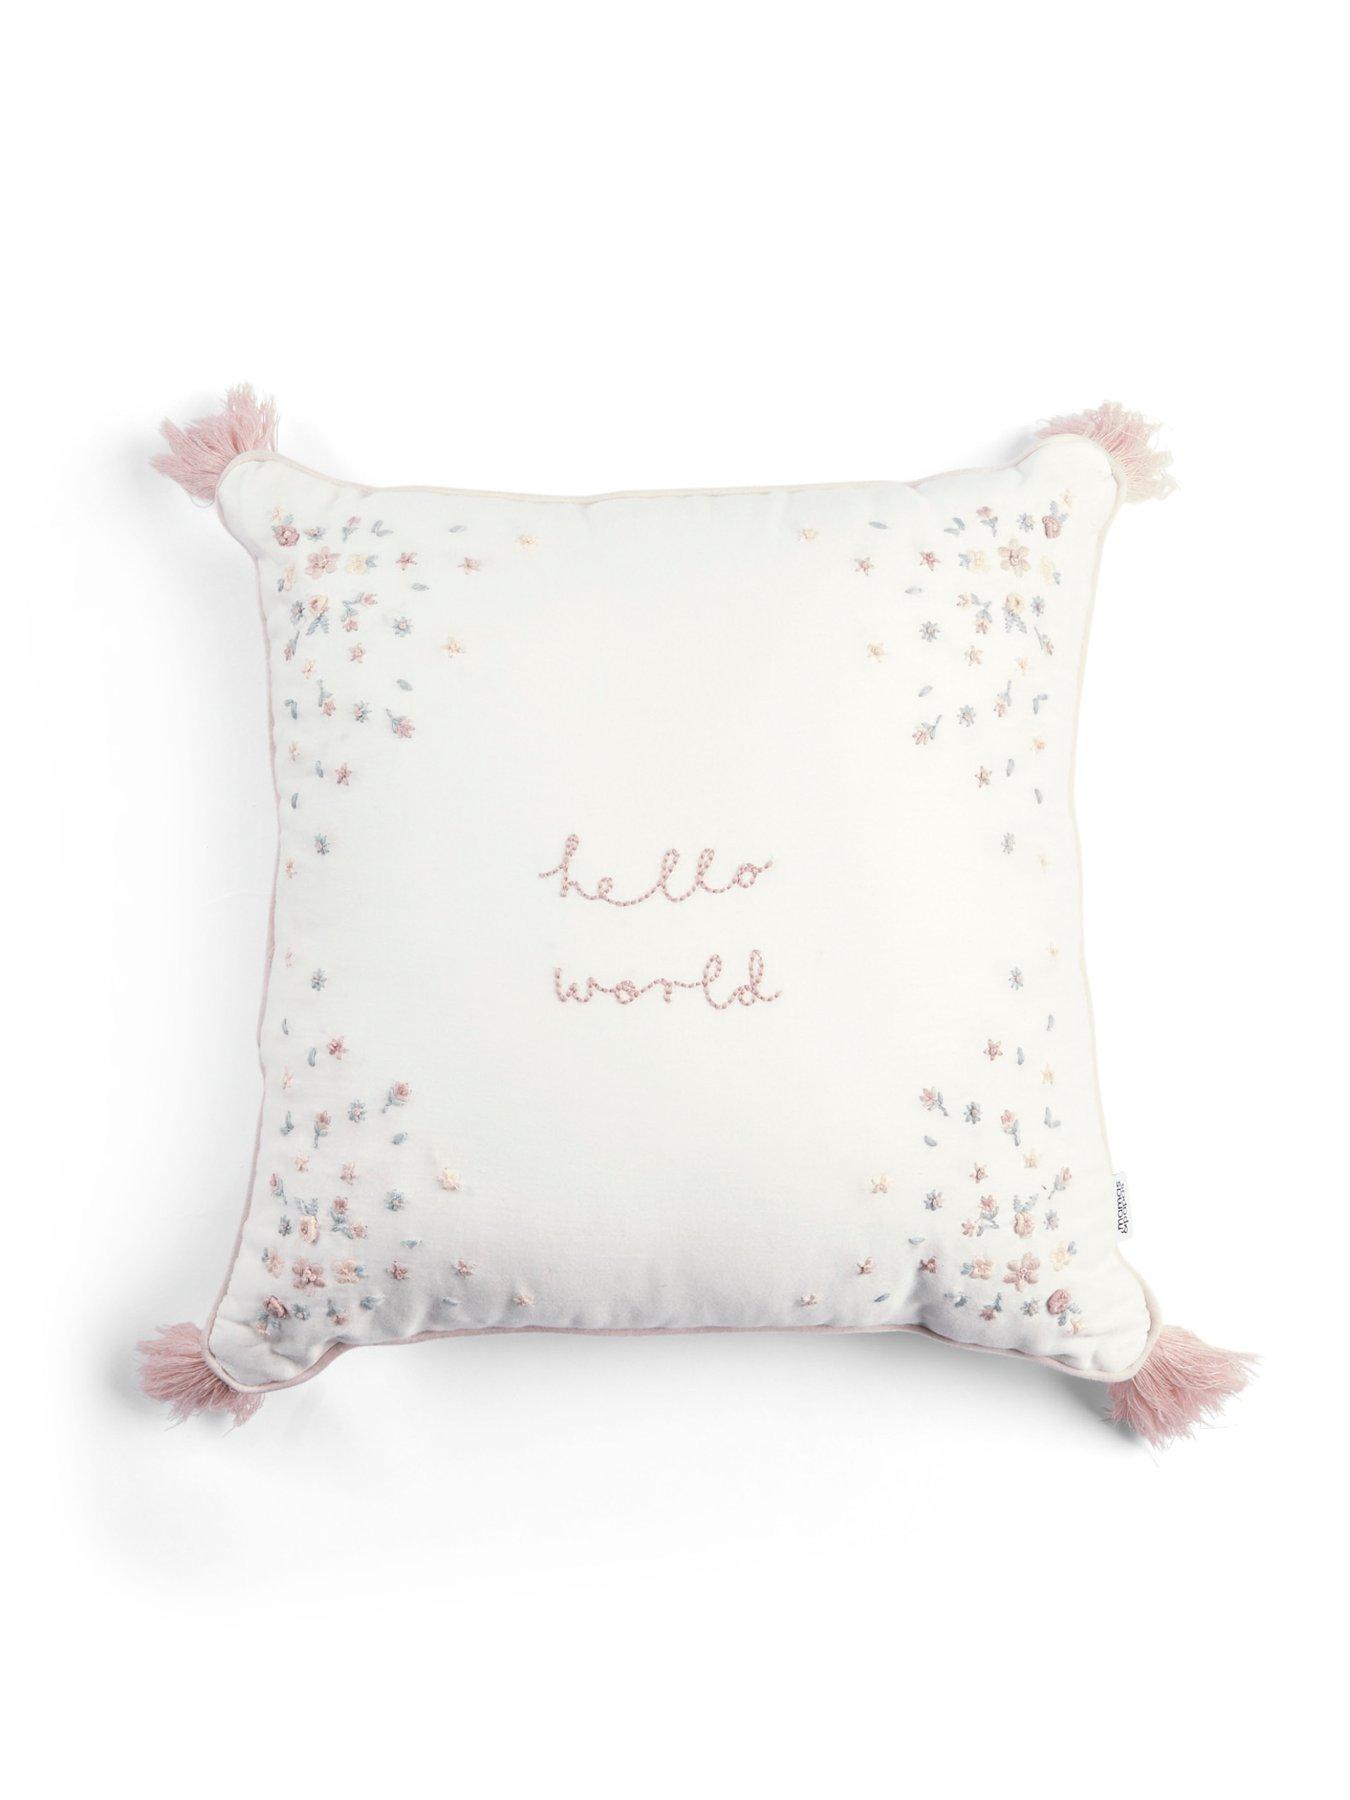 https://media.very.co.uk/i/very/VRCW4_SQ1_0000000524_WHITE_PINK_RSr/mamas-papas-cushion-welcome-to-the-world-floral.jpg?$180x240_retinamobilex2$